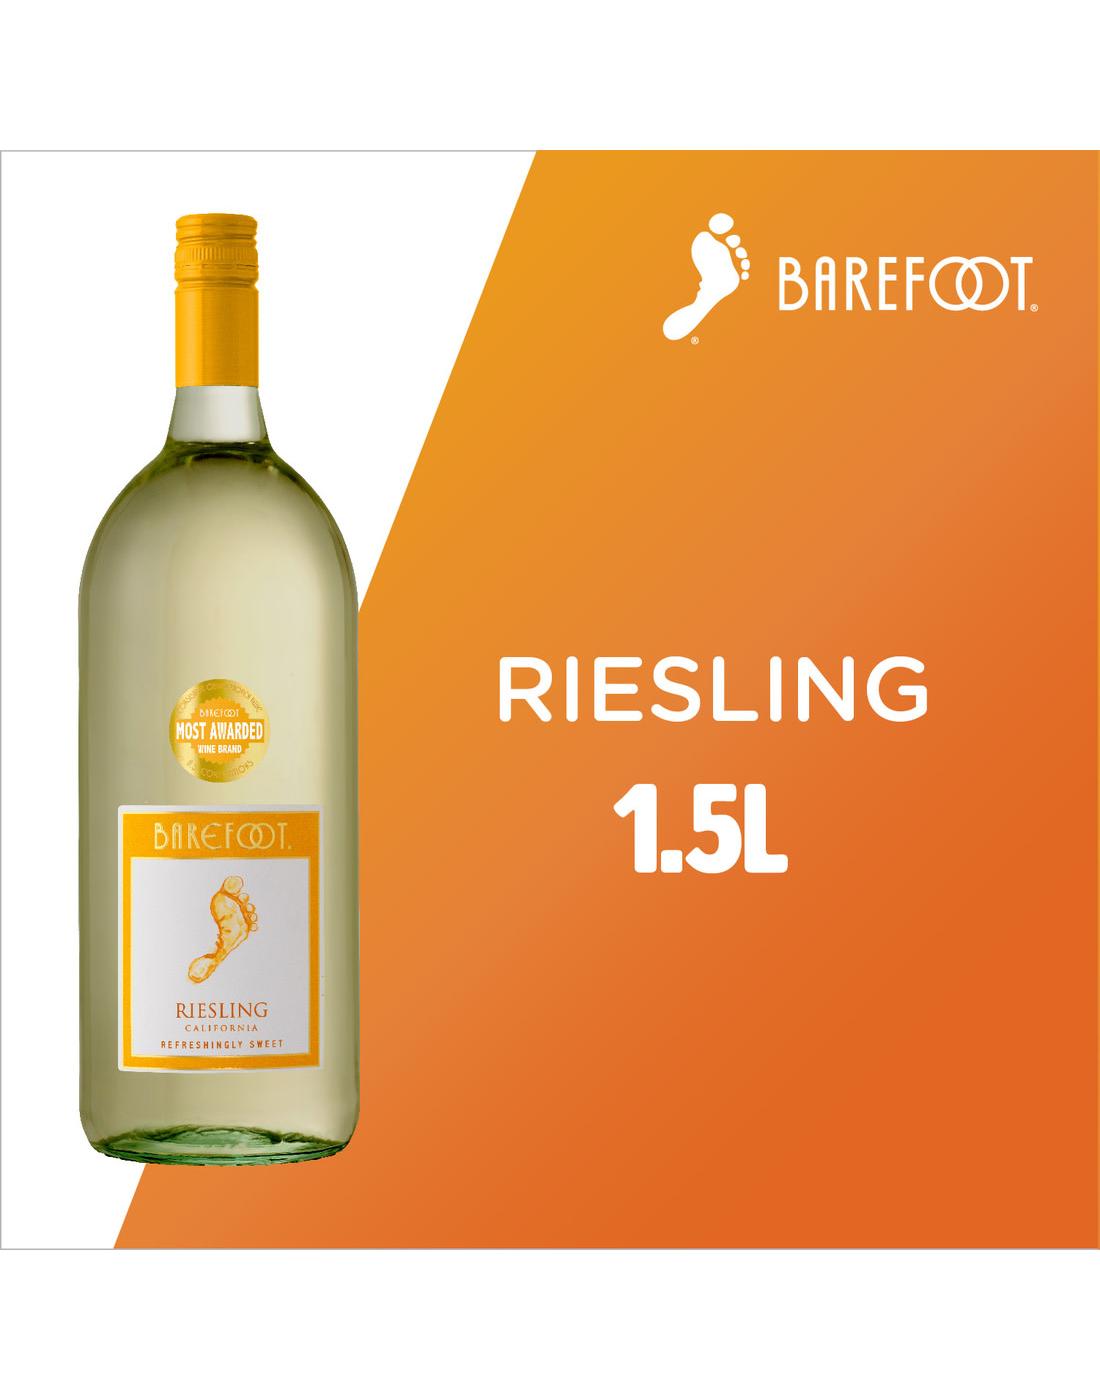 Barefoot Riesling White Wine; image 5 of 7